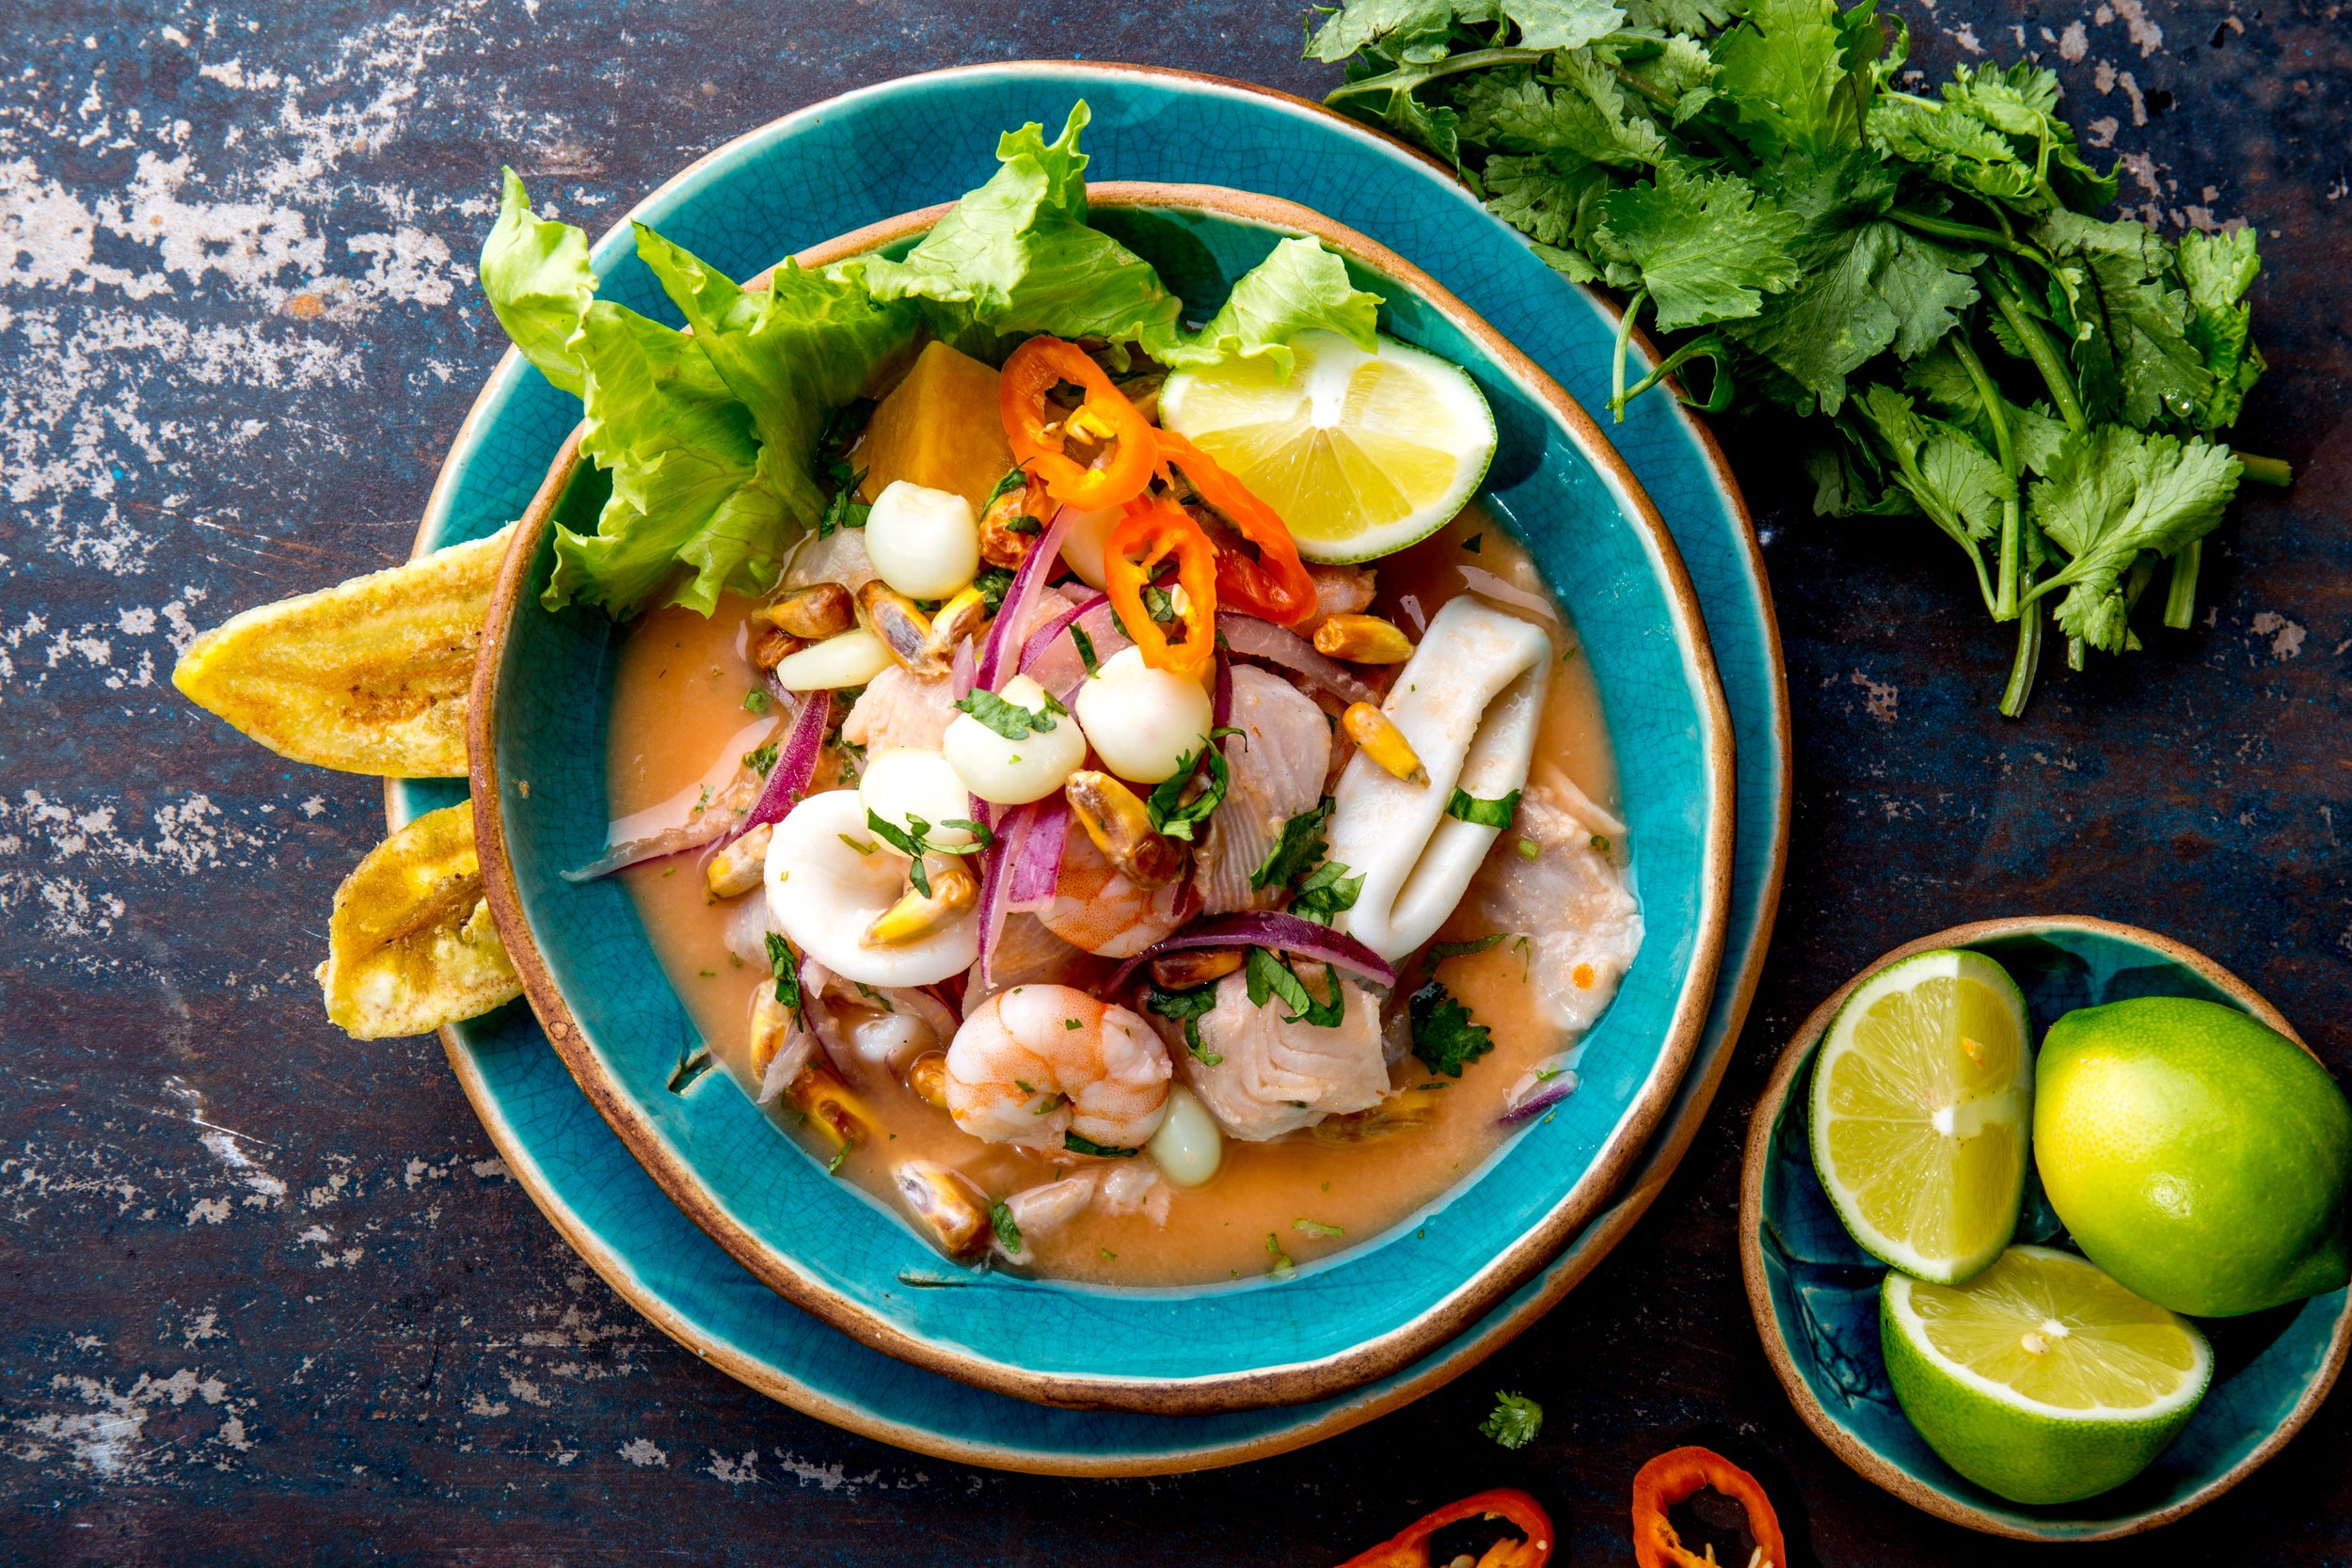 Enjoy ceviche and other Peruvian cuisine